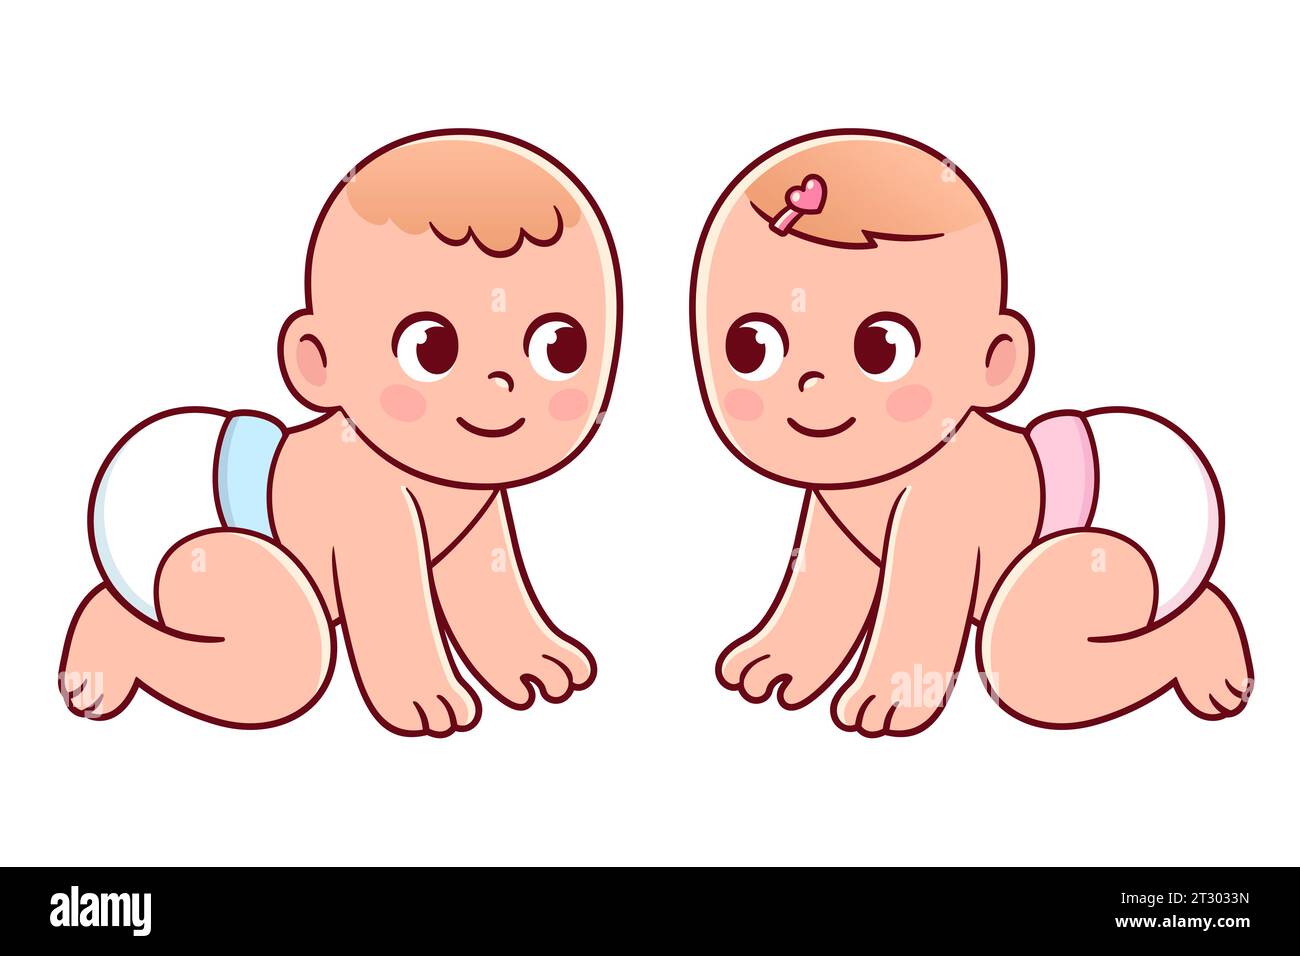 Cute cartoon drawing of crawling baby boy and girl. Baby gender color on diapers. Vector clip art illustration. Stock Vector